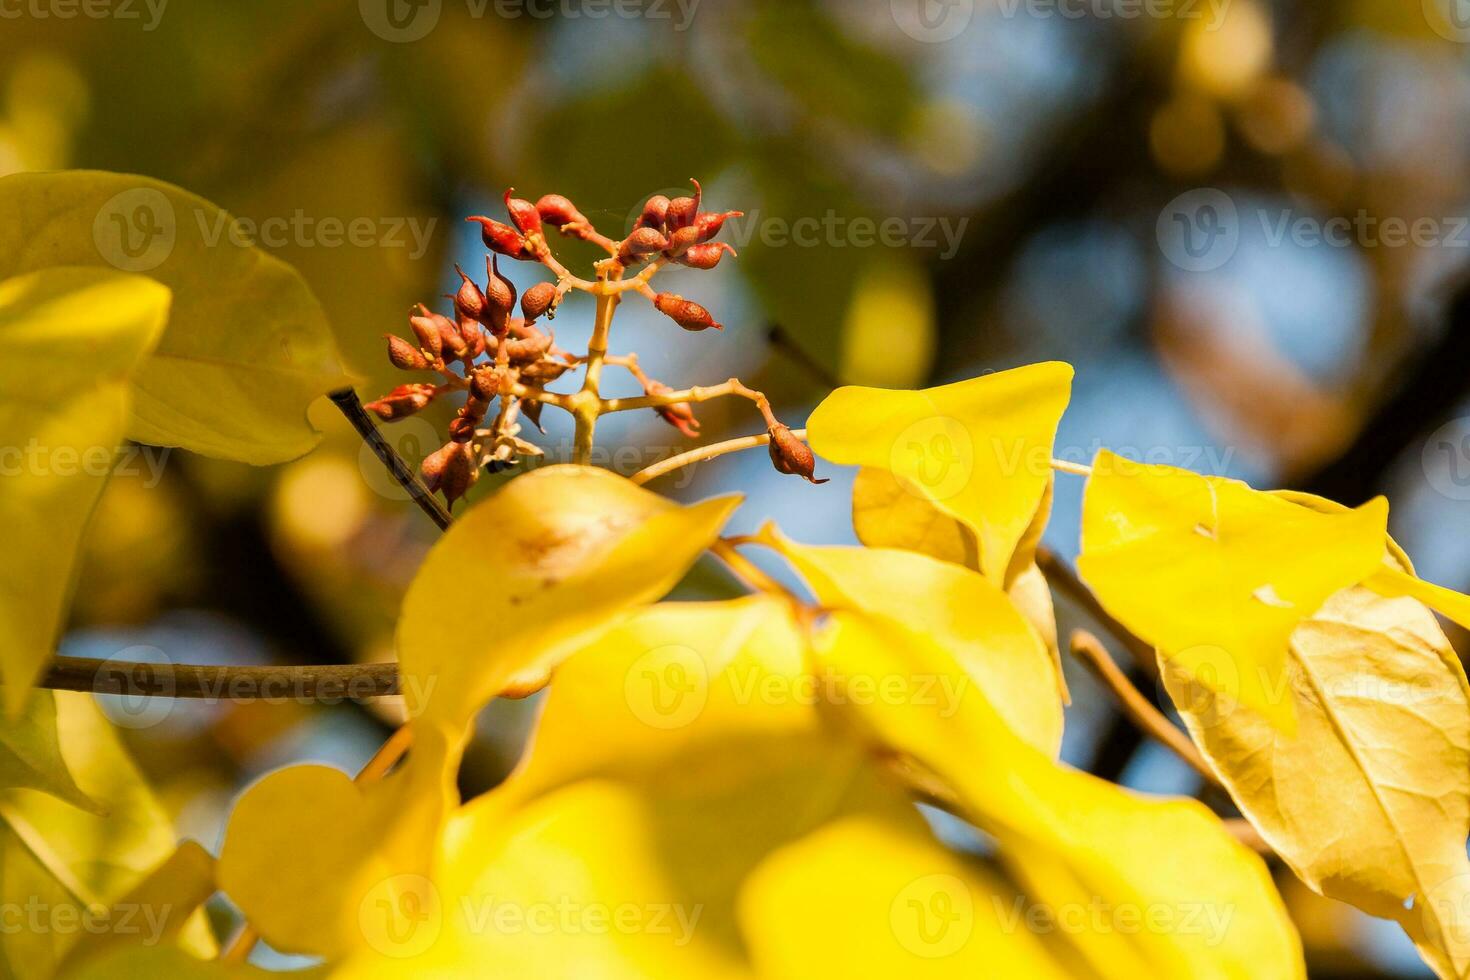 Autumn leaves with wild fruits close-up photo